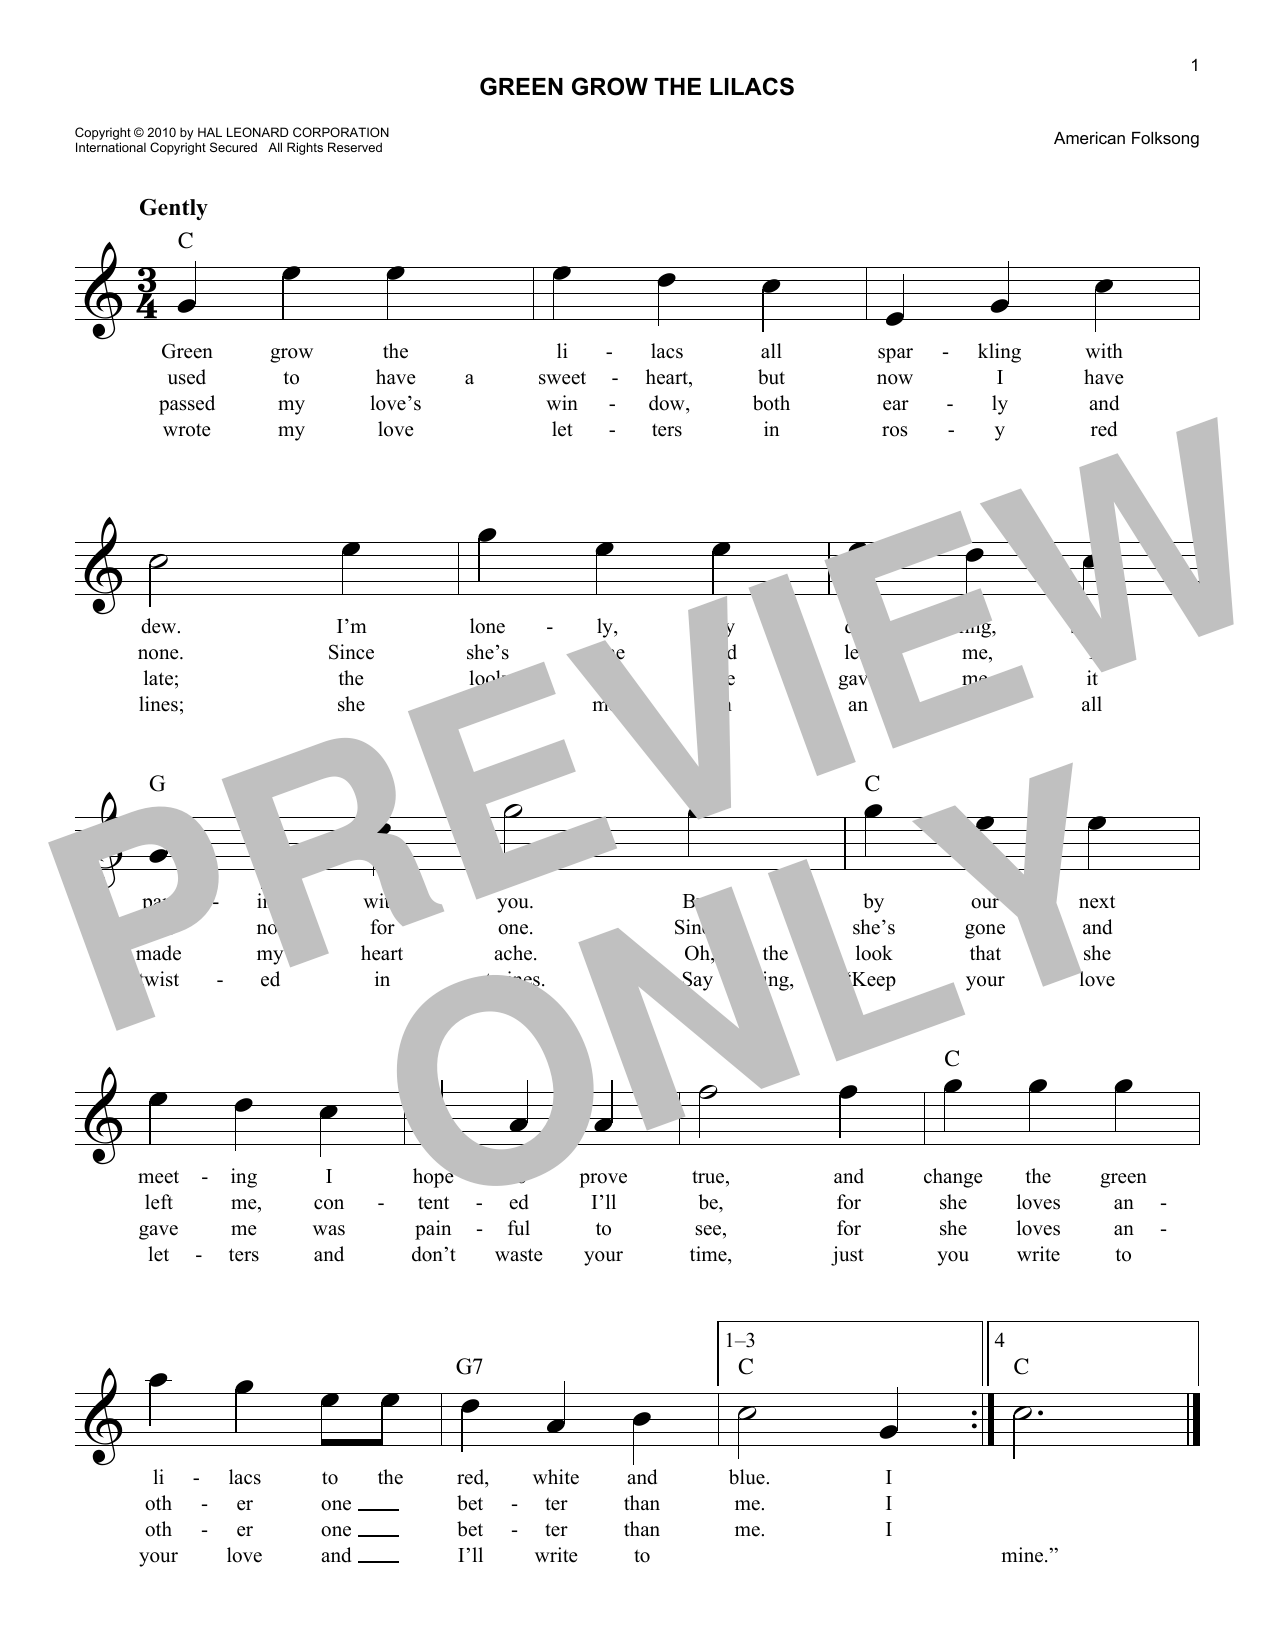 Traditional Folksong Green Grow The Lilacs sheet music notes and chords. Download Printable PDF.